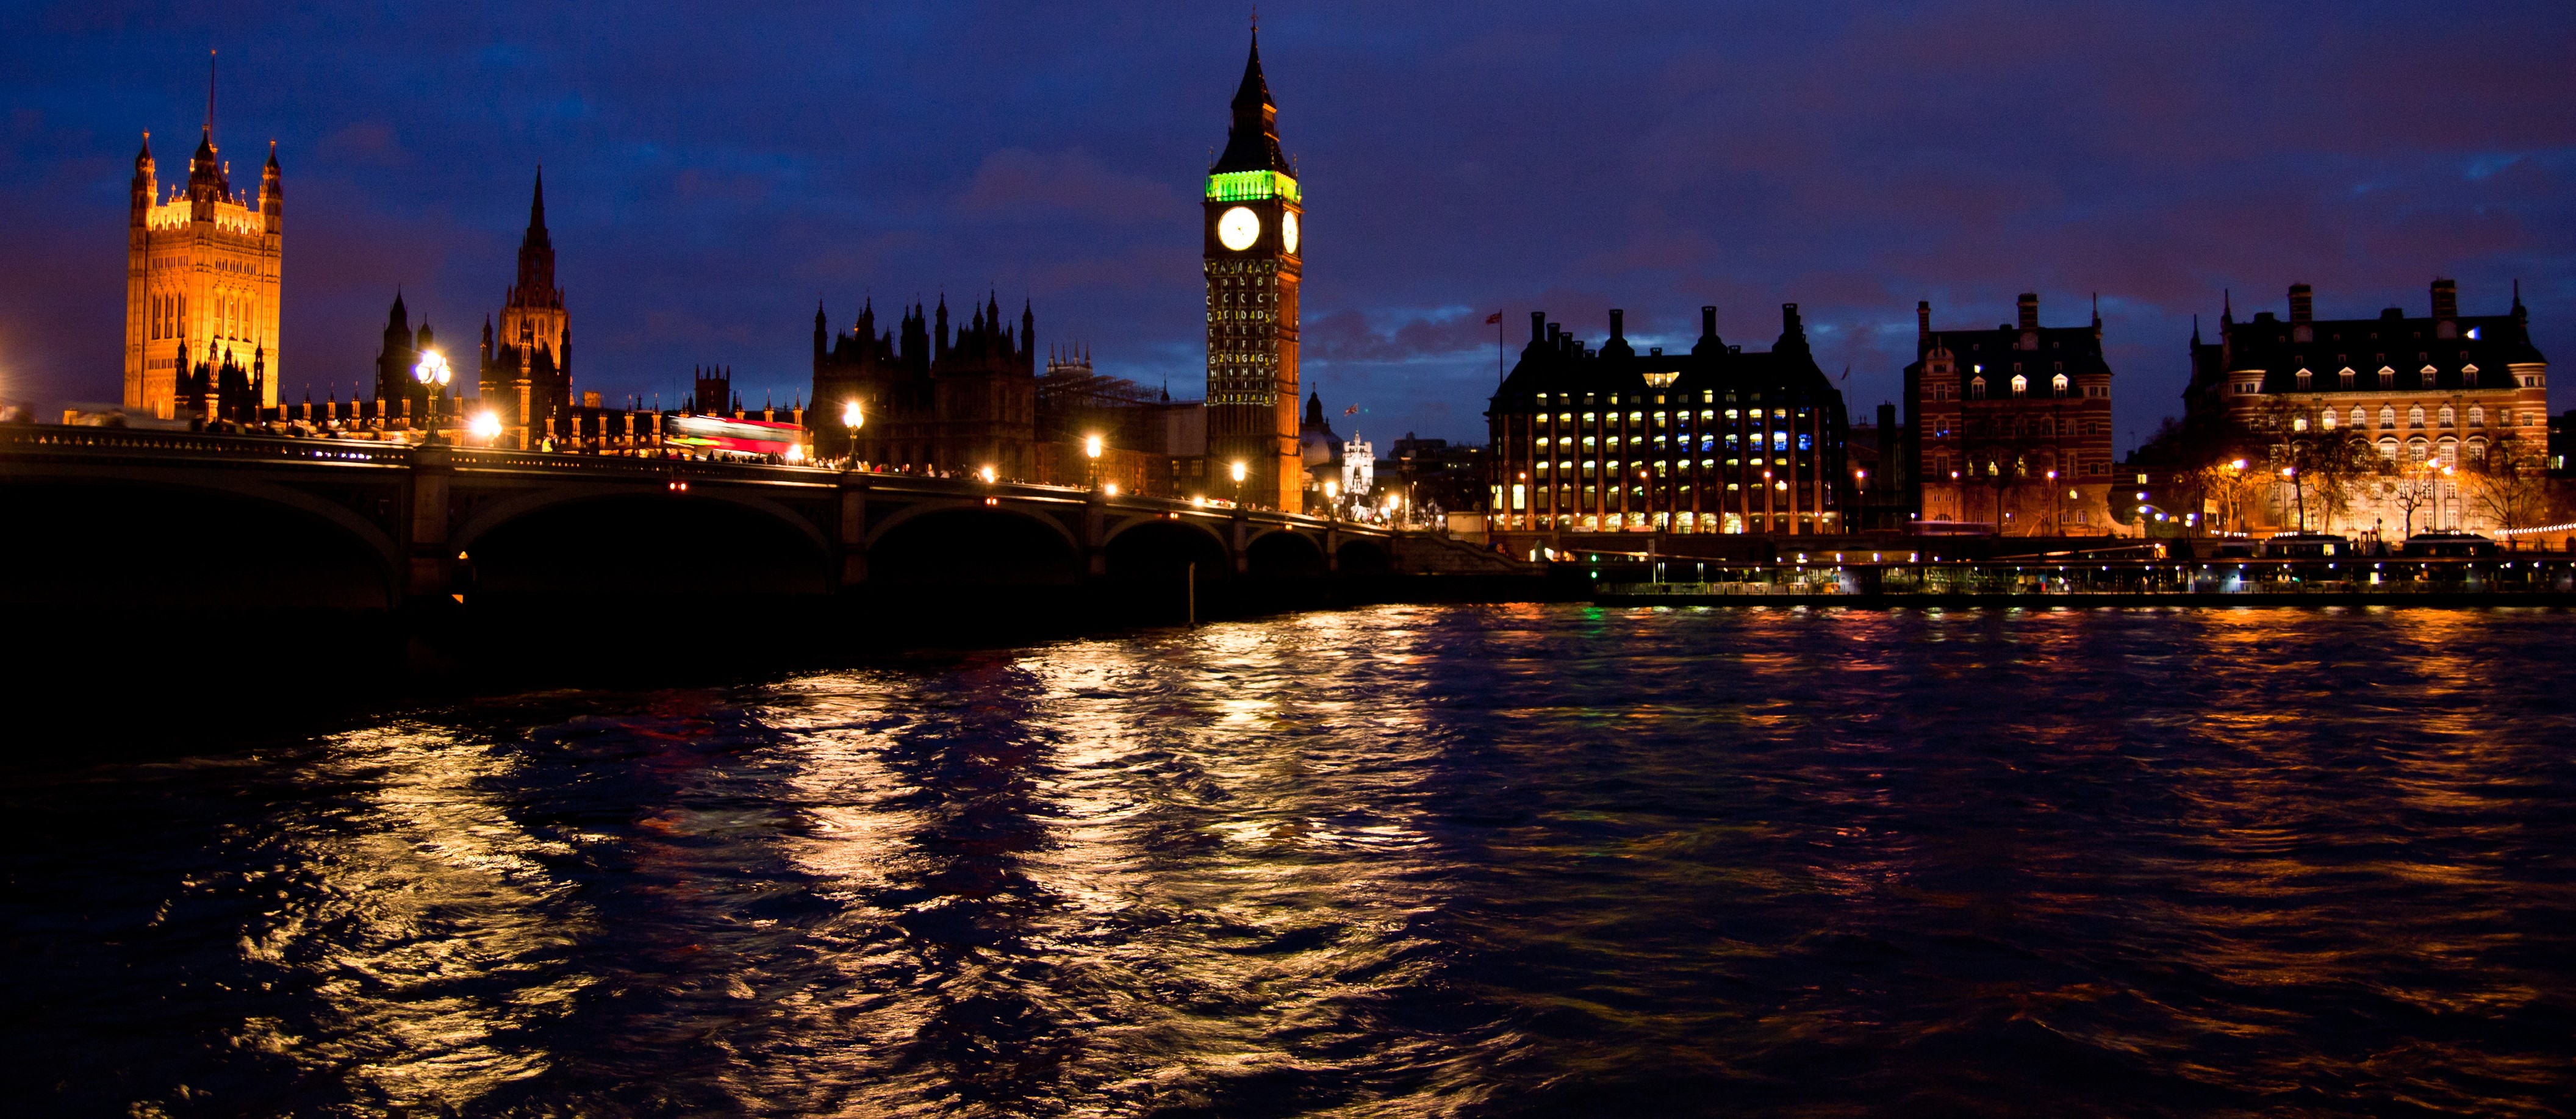 Found For Cityscapes London Buildings Big Ben HD Wallpaper City Town